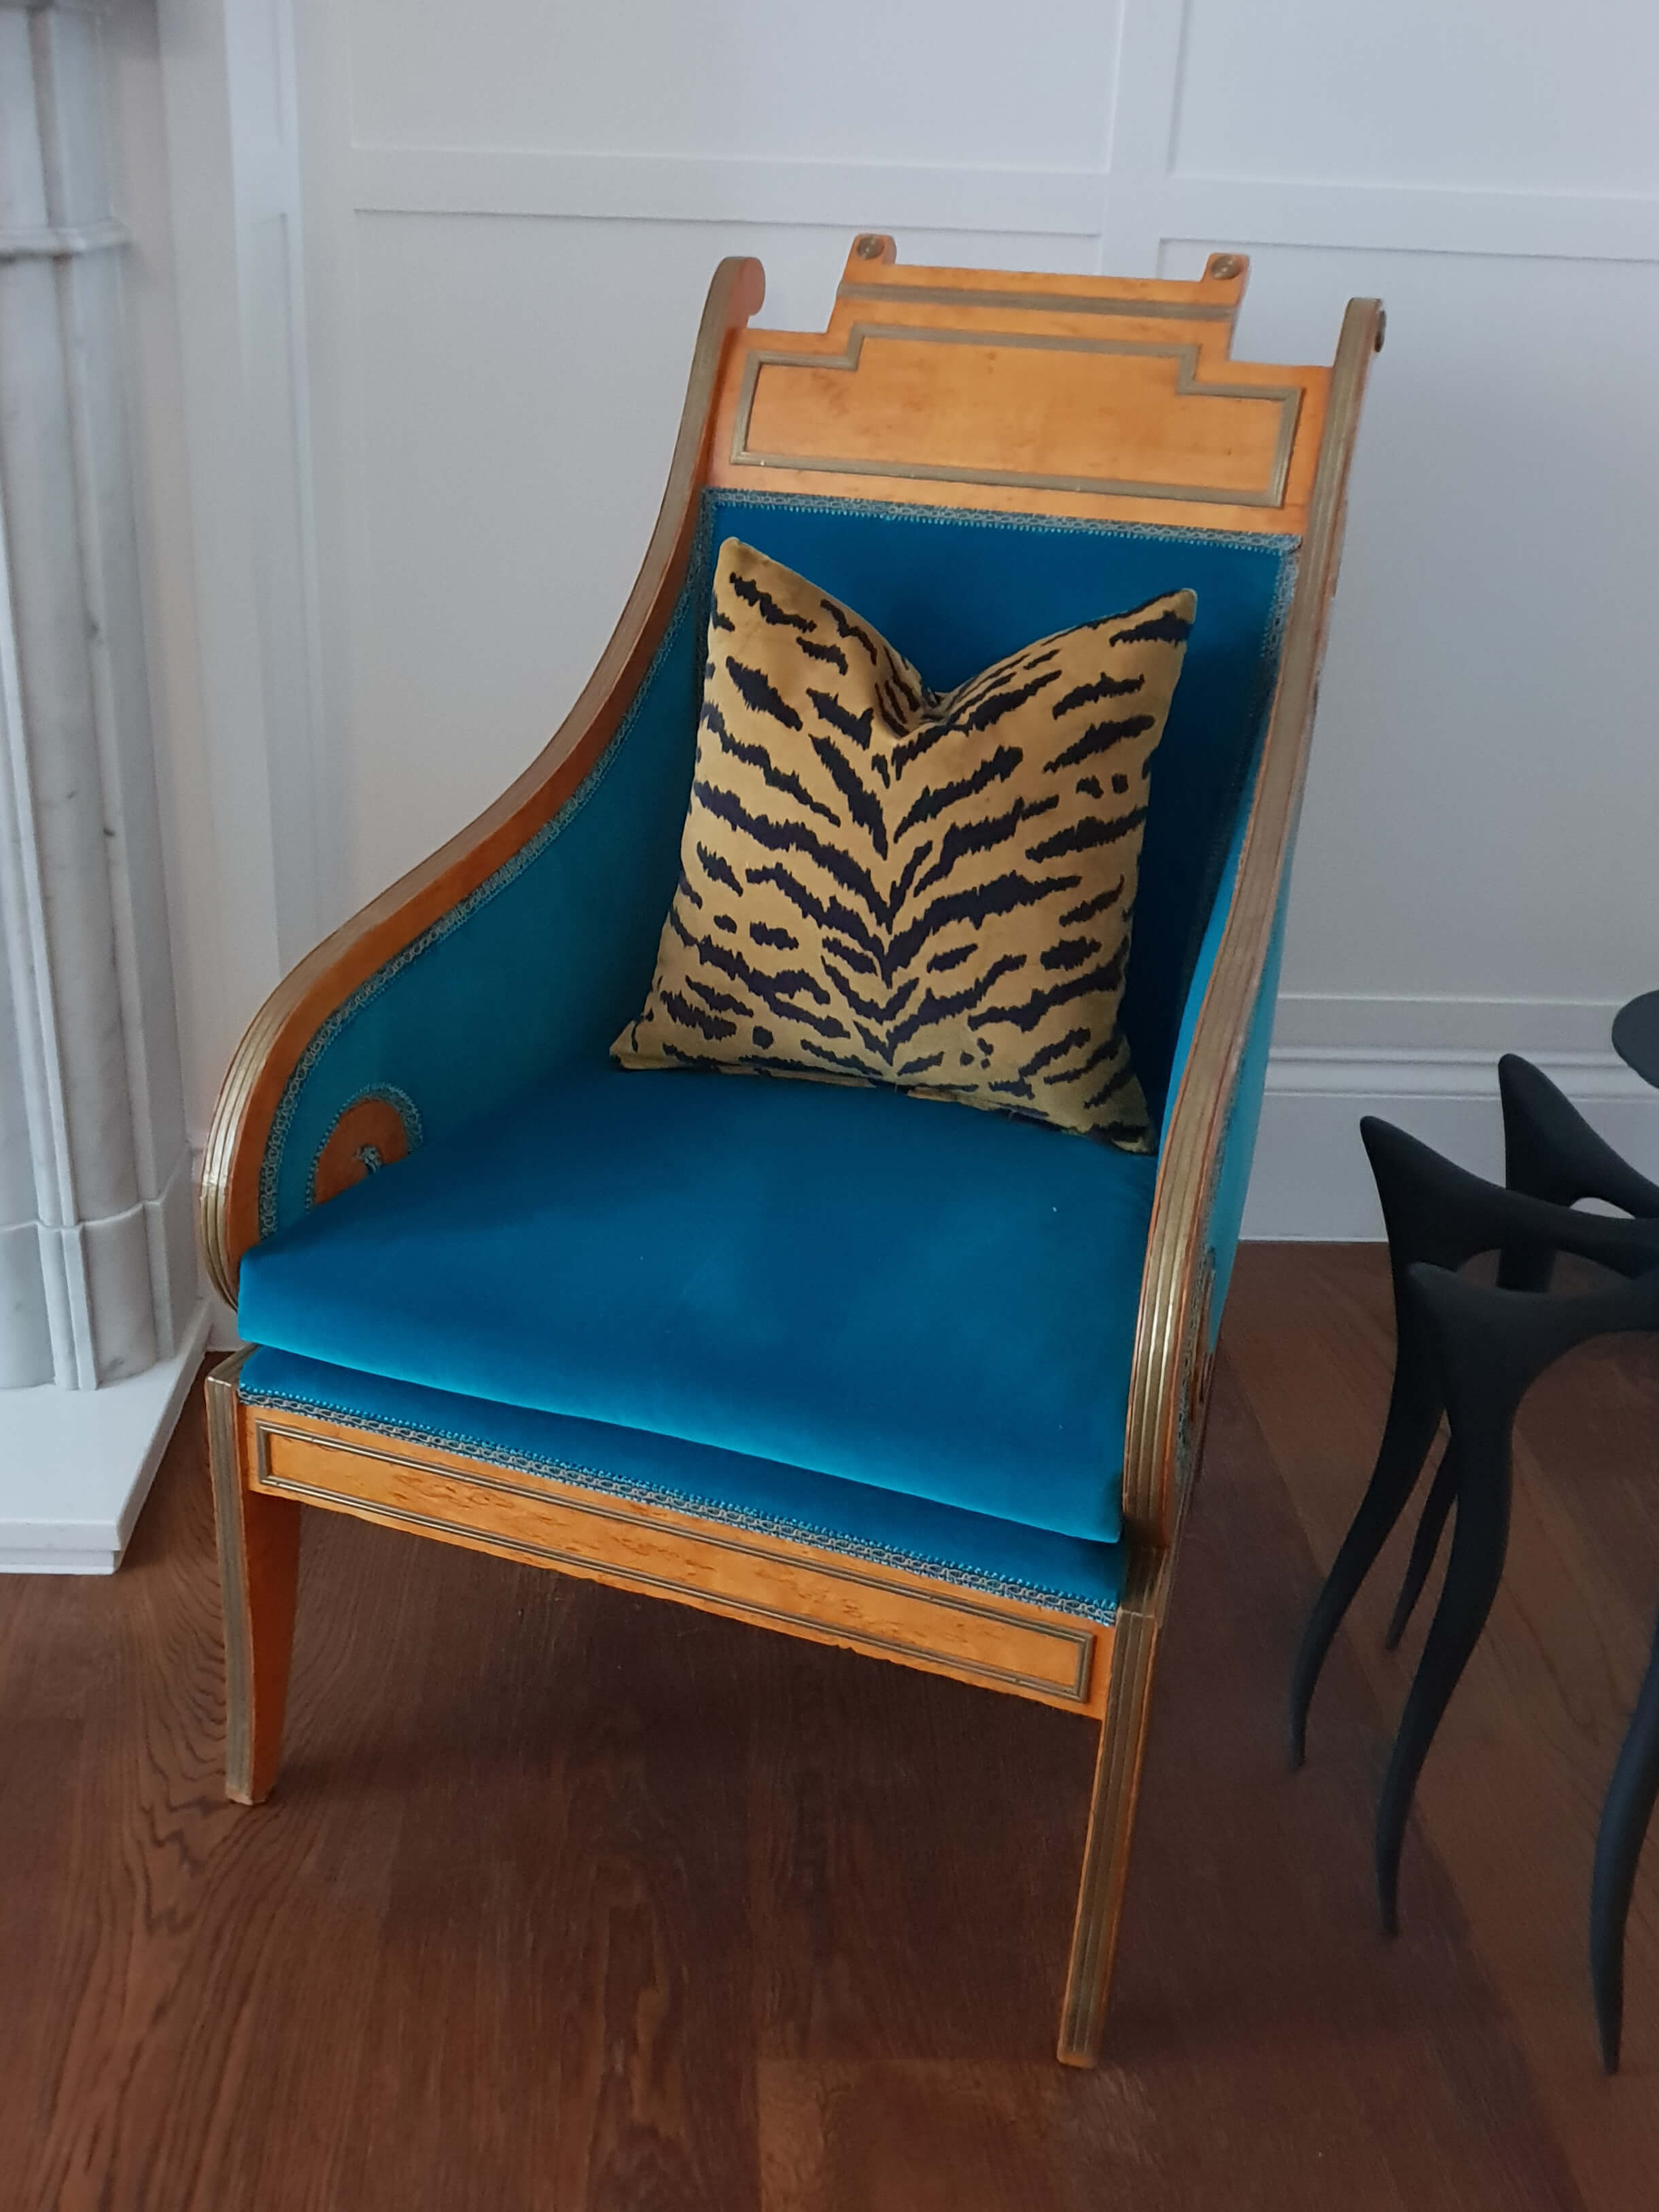 Upholstered chair in blue fabric with tiger pattern cushion